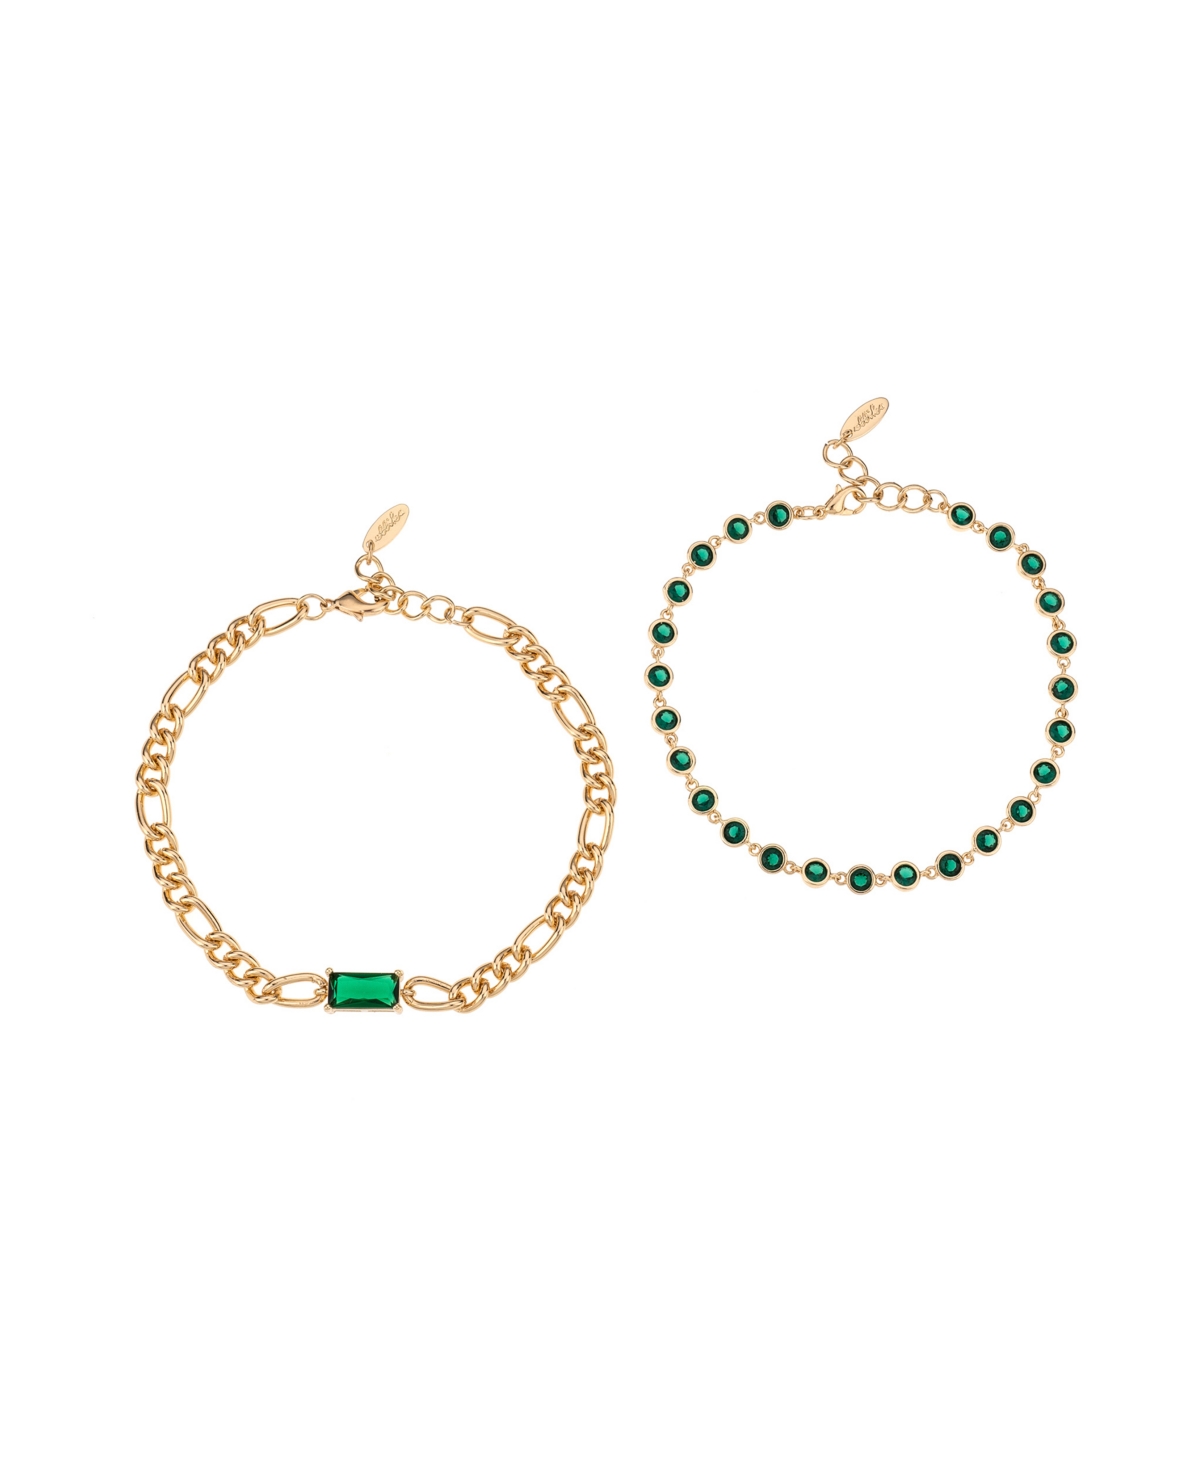 Bejeweled Emerald 18K Gold Plated Anklet Set, 2 Pieces - Green